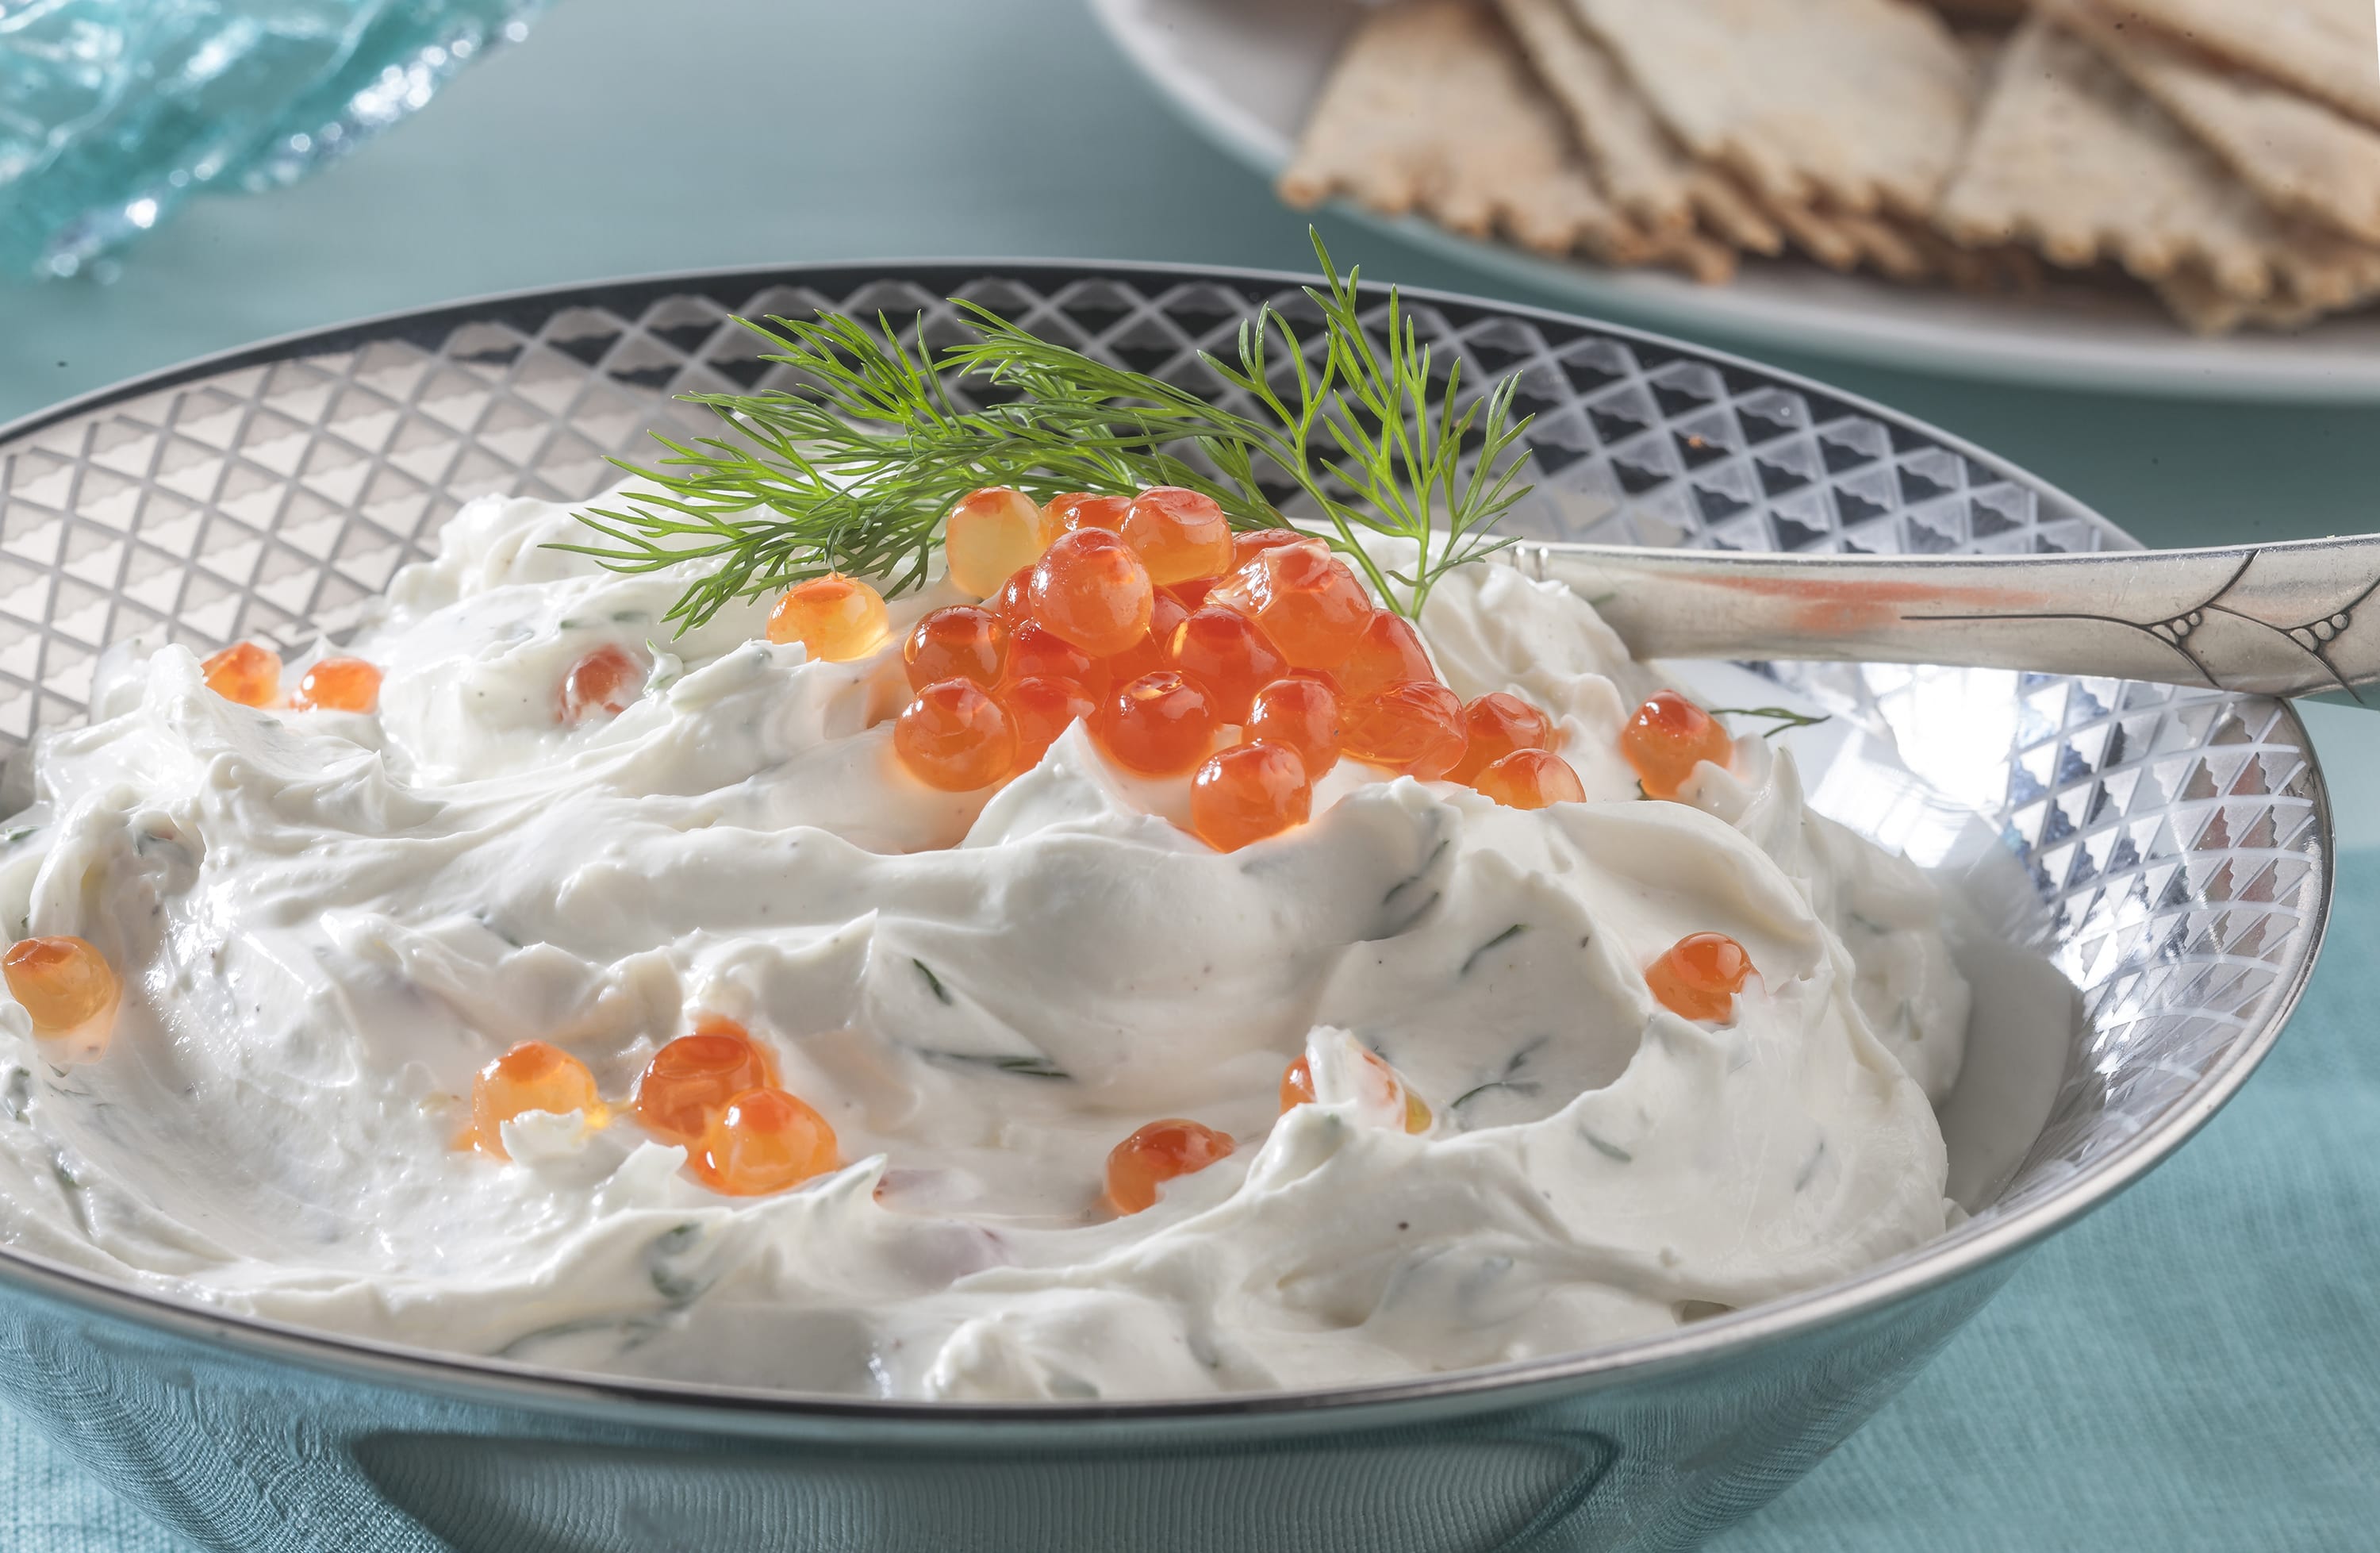 A silky and rich salmon roe dip from Ina Garten makes an elegant appetizer that's also incredibly easy to whip up.